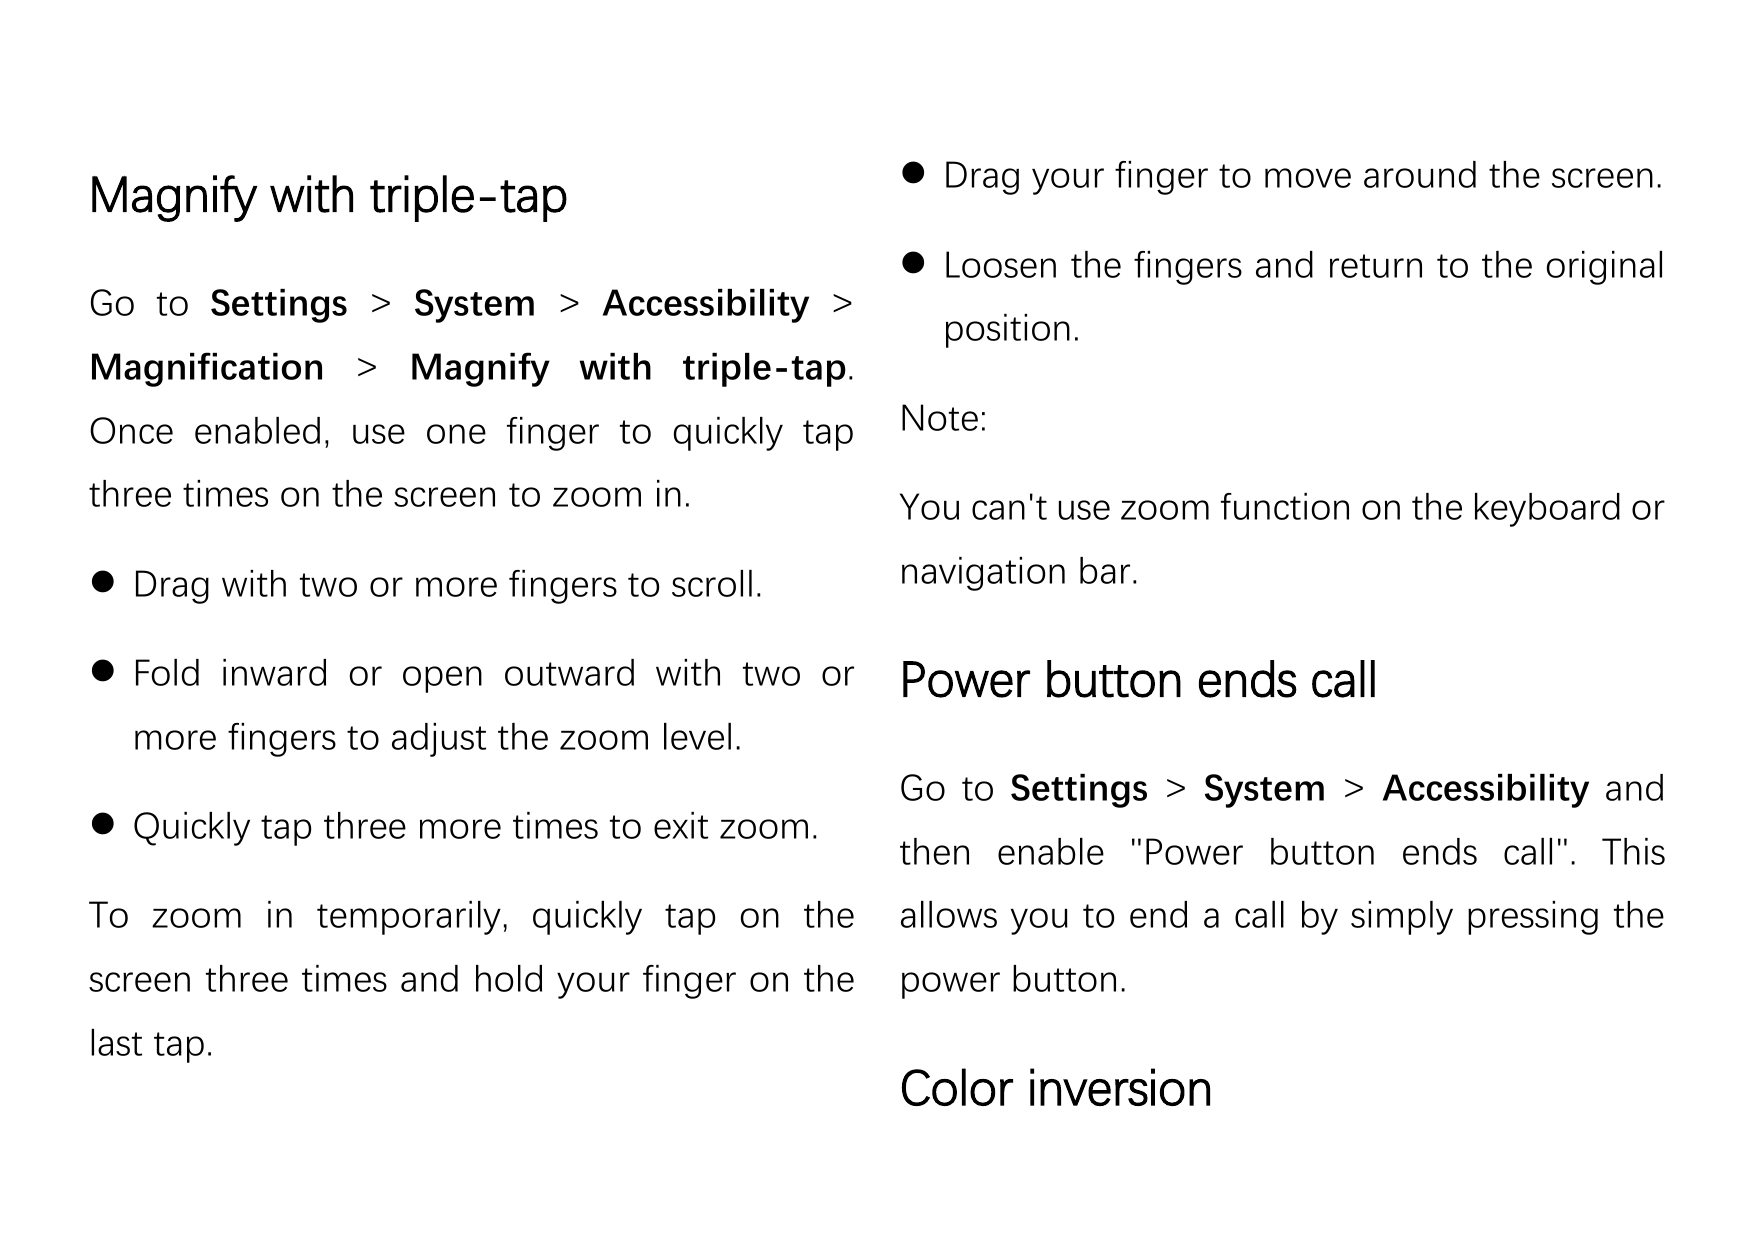 Magnify with triple-tapGo to Settings > System > Accessibility >Magnification > Magnify with triple-tap. Drag your finger to mo